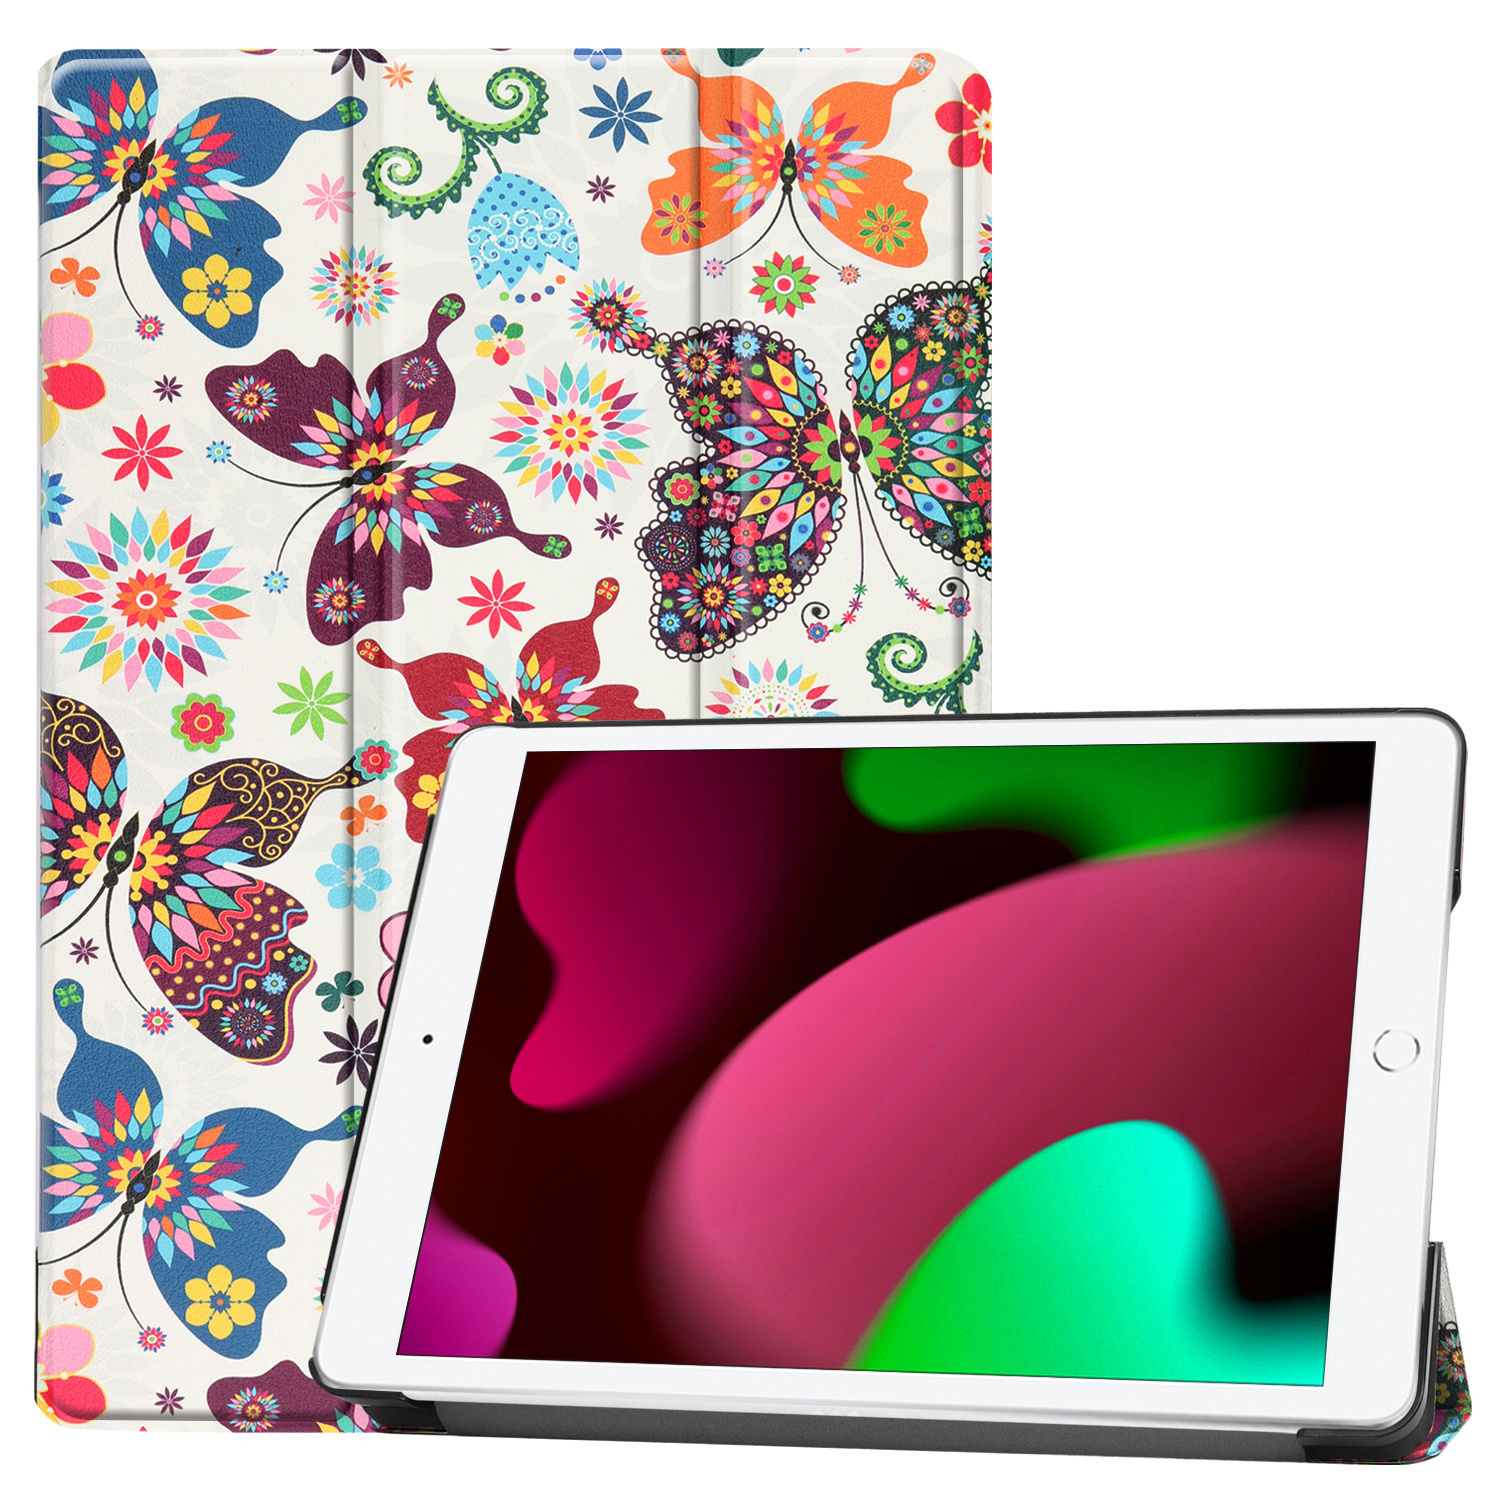 Nomfy iPad 10.2 2019 Hoesje Book Case Hoes - iPad 10.2 2019 Hoes Hardcover Case Hoesje - Vlinder